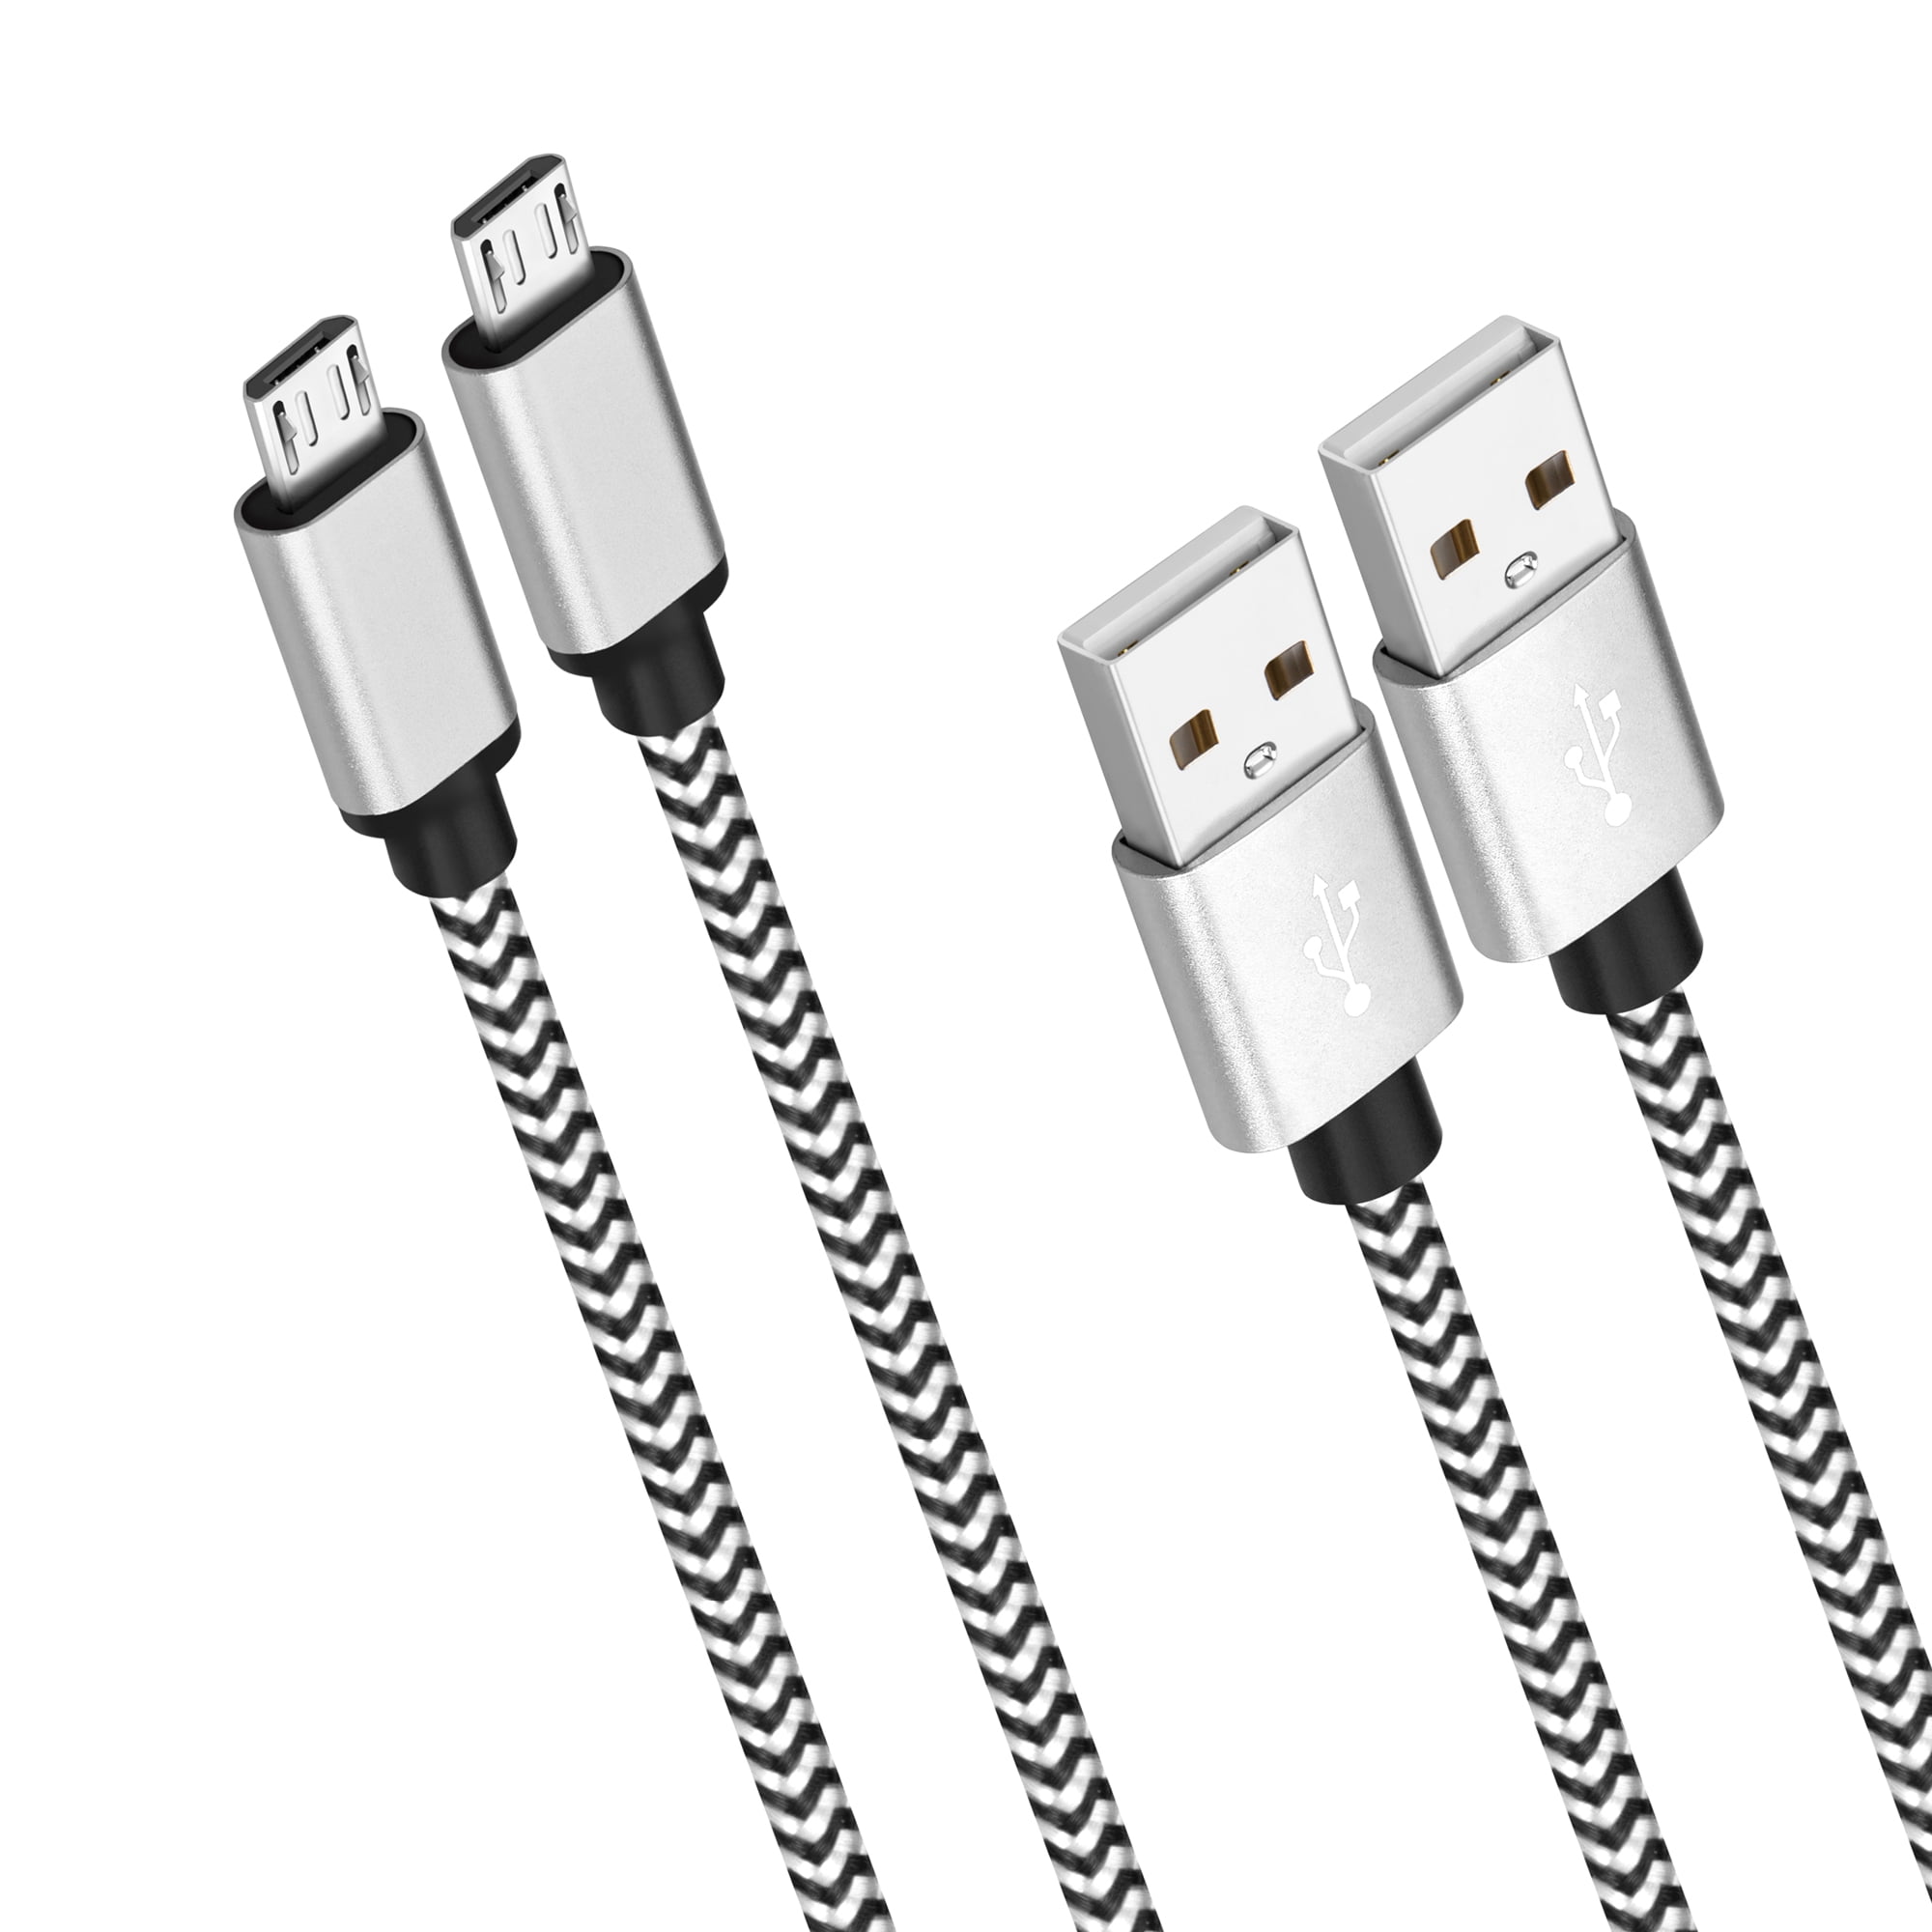 CableCreation Short Micro USB Cable, USB to Micro USB 24 AWG Triple  Shielded Fast Charger Cable, Compatible with TV Stick, PS4, Chromecast,  Power